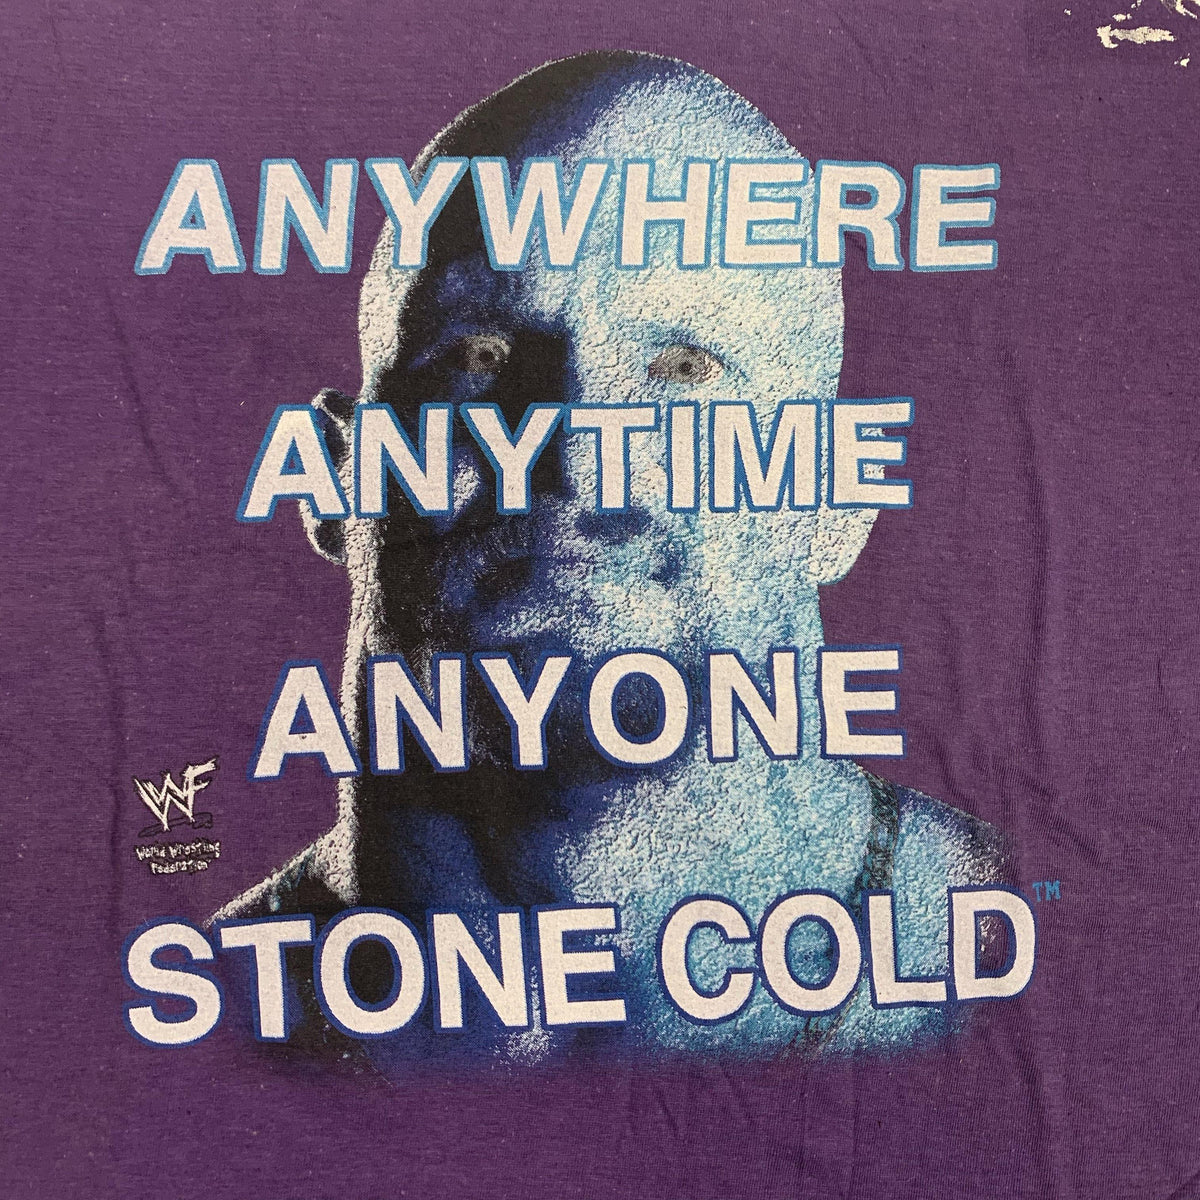 Vintage Stone Cold “Anywhere Anytime” T-Shirt - jointcustodydc